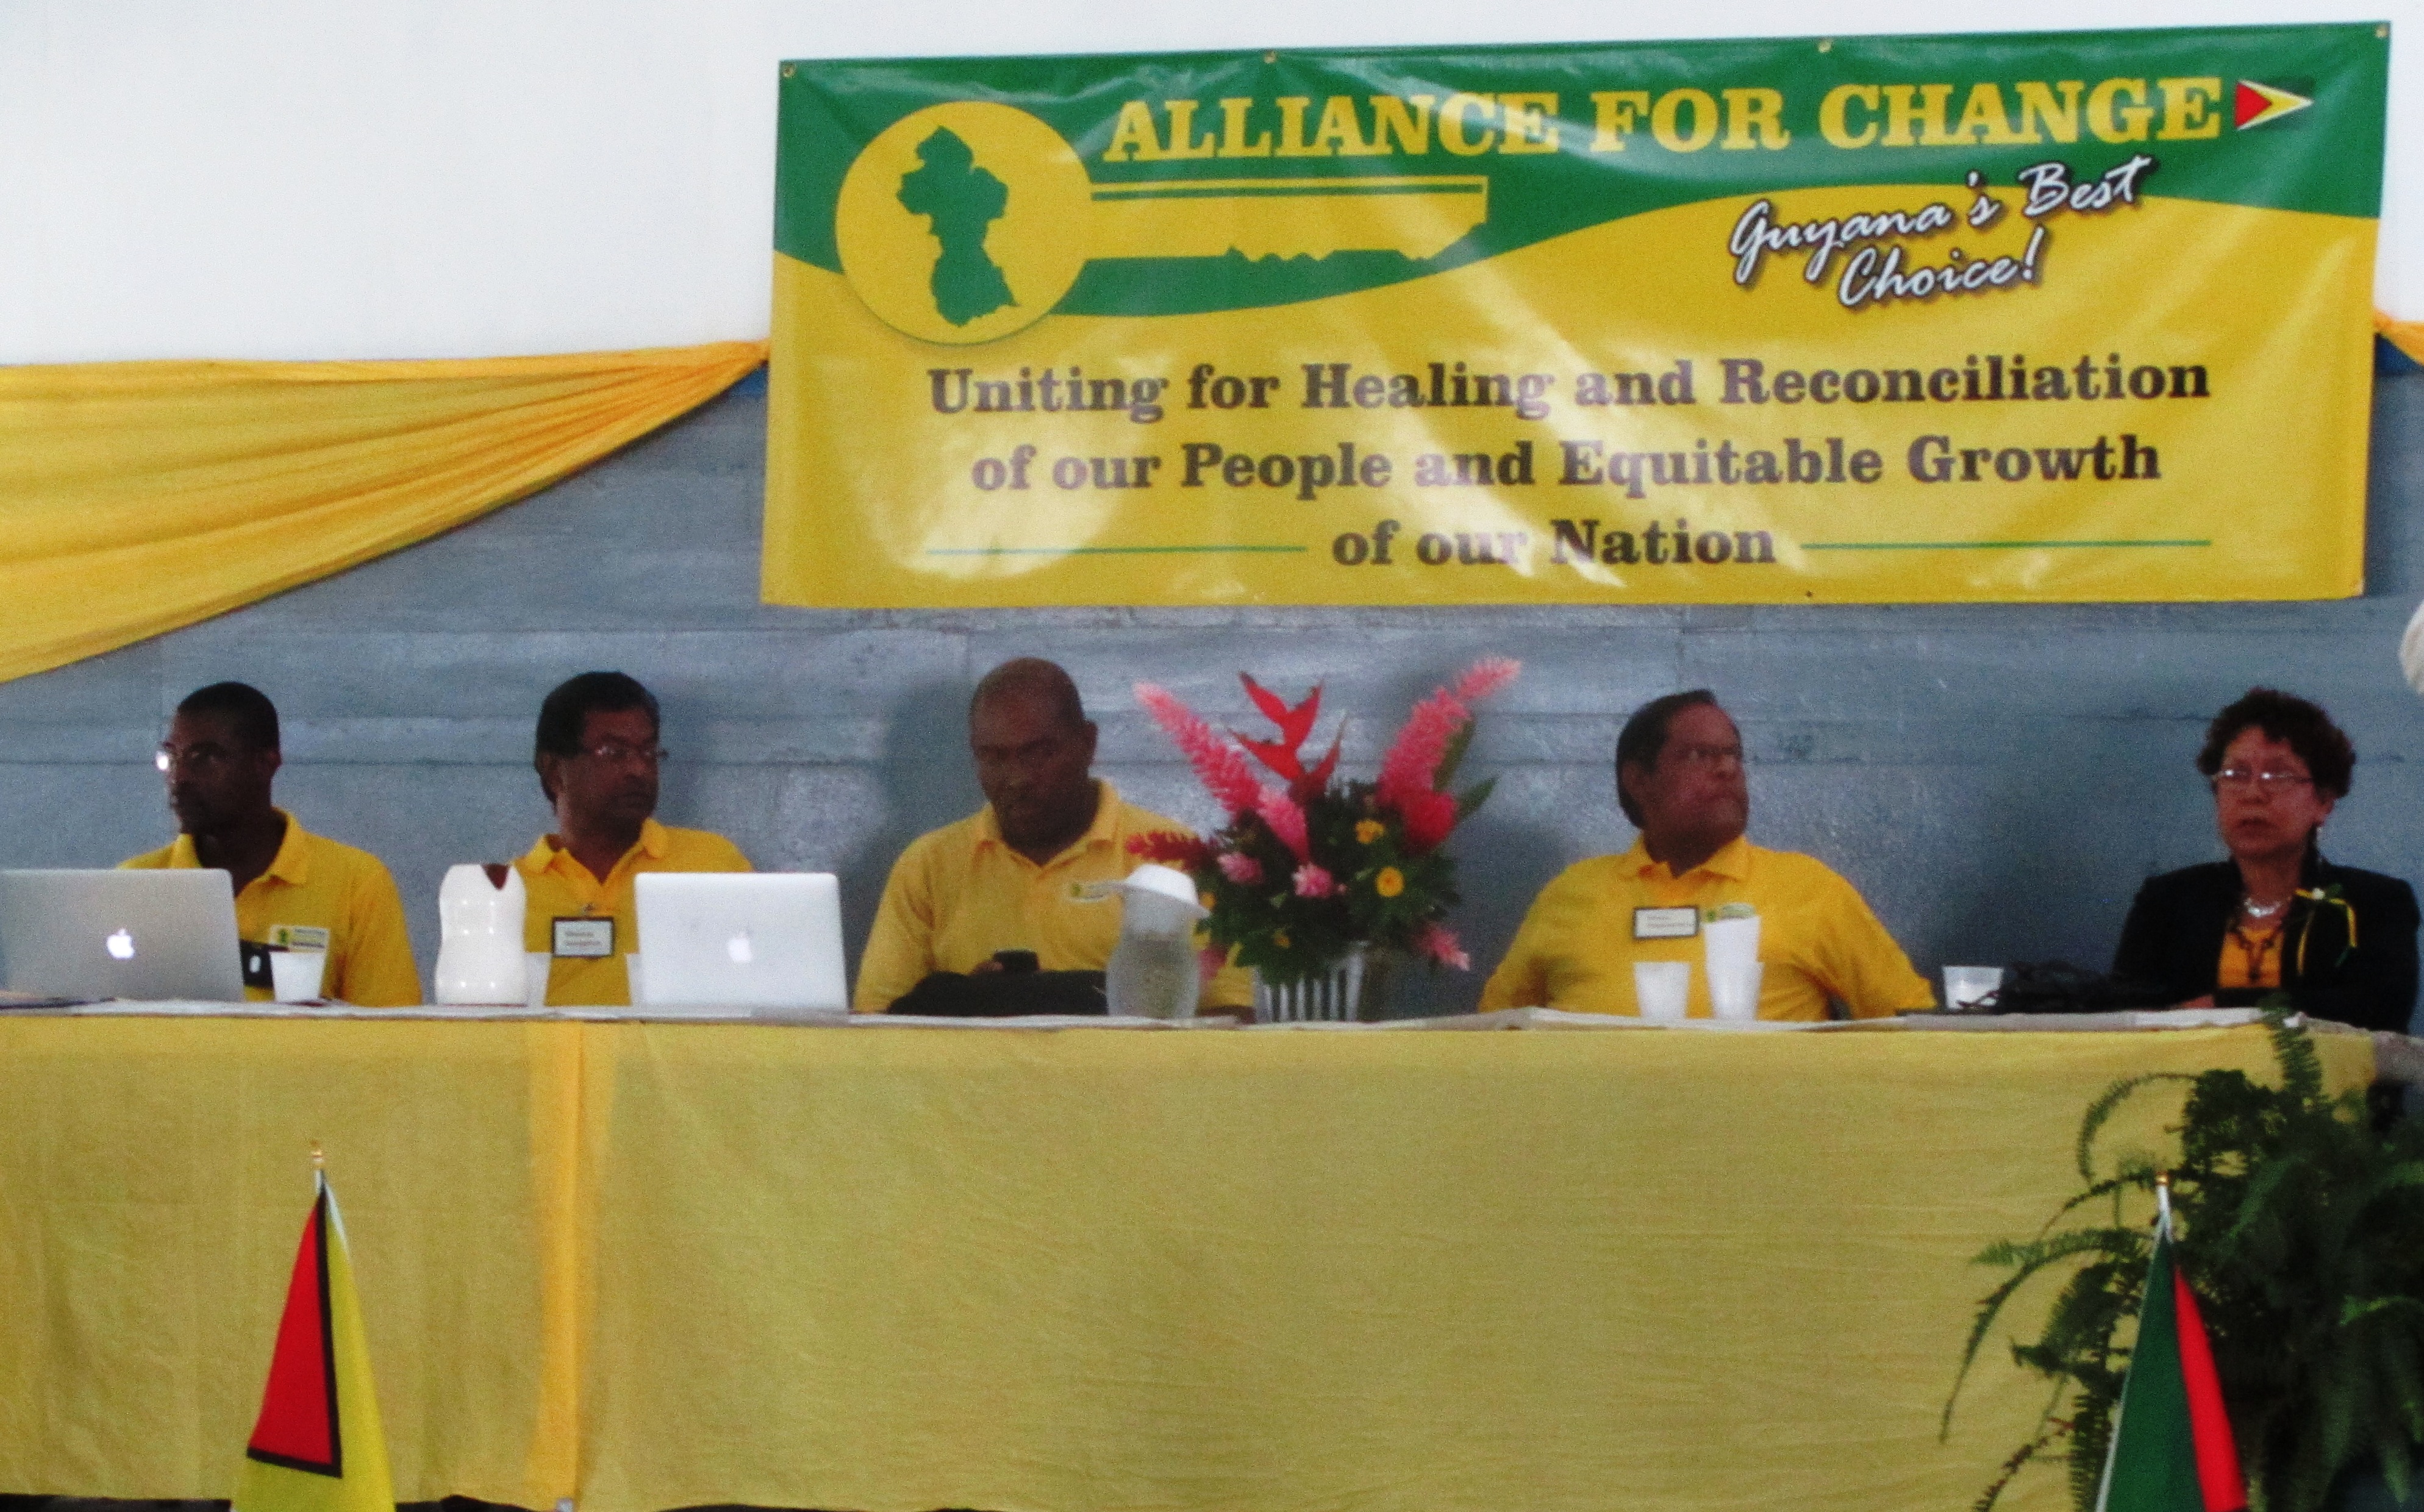 http://www.inewsguyana.com/wp-content/uploads/2014/12/AFC-Conference-2.jpg